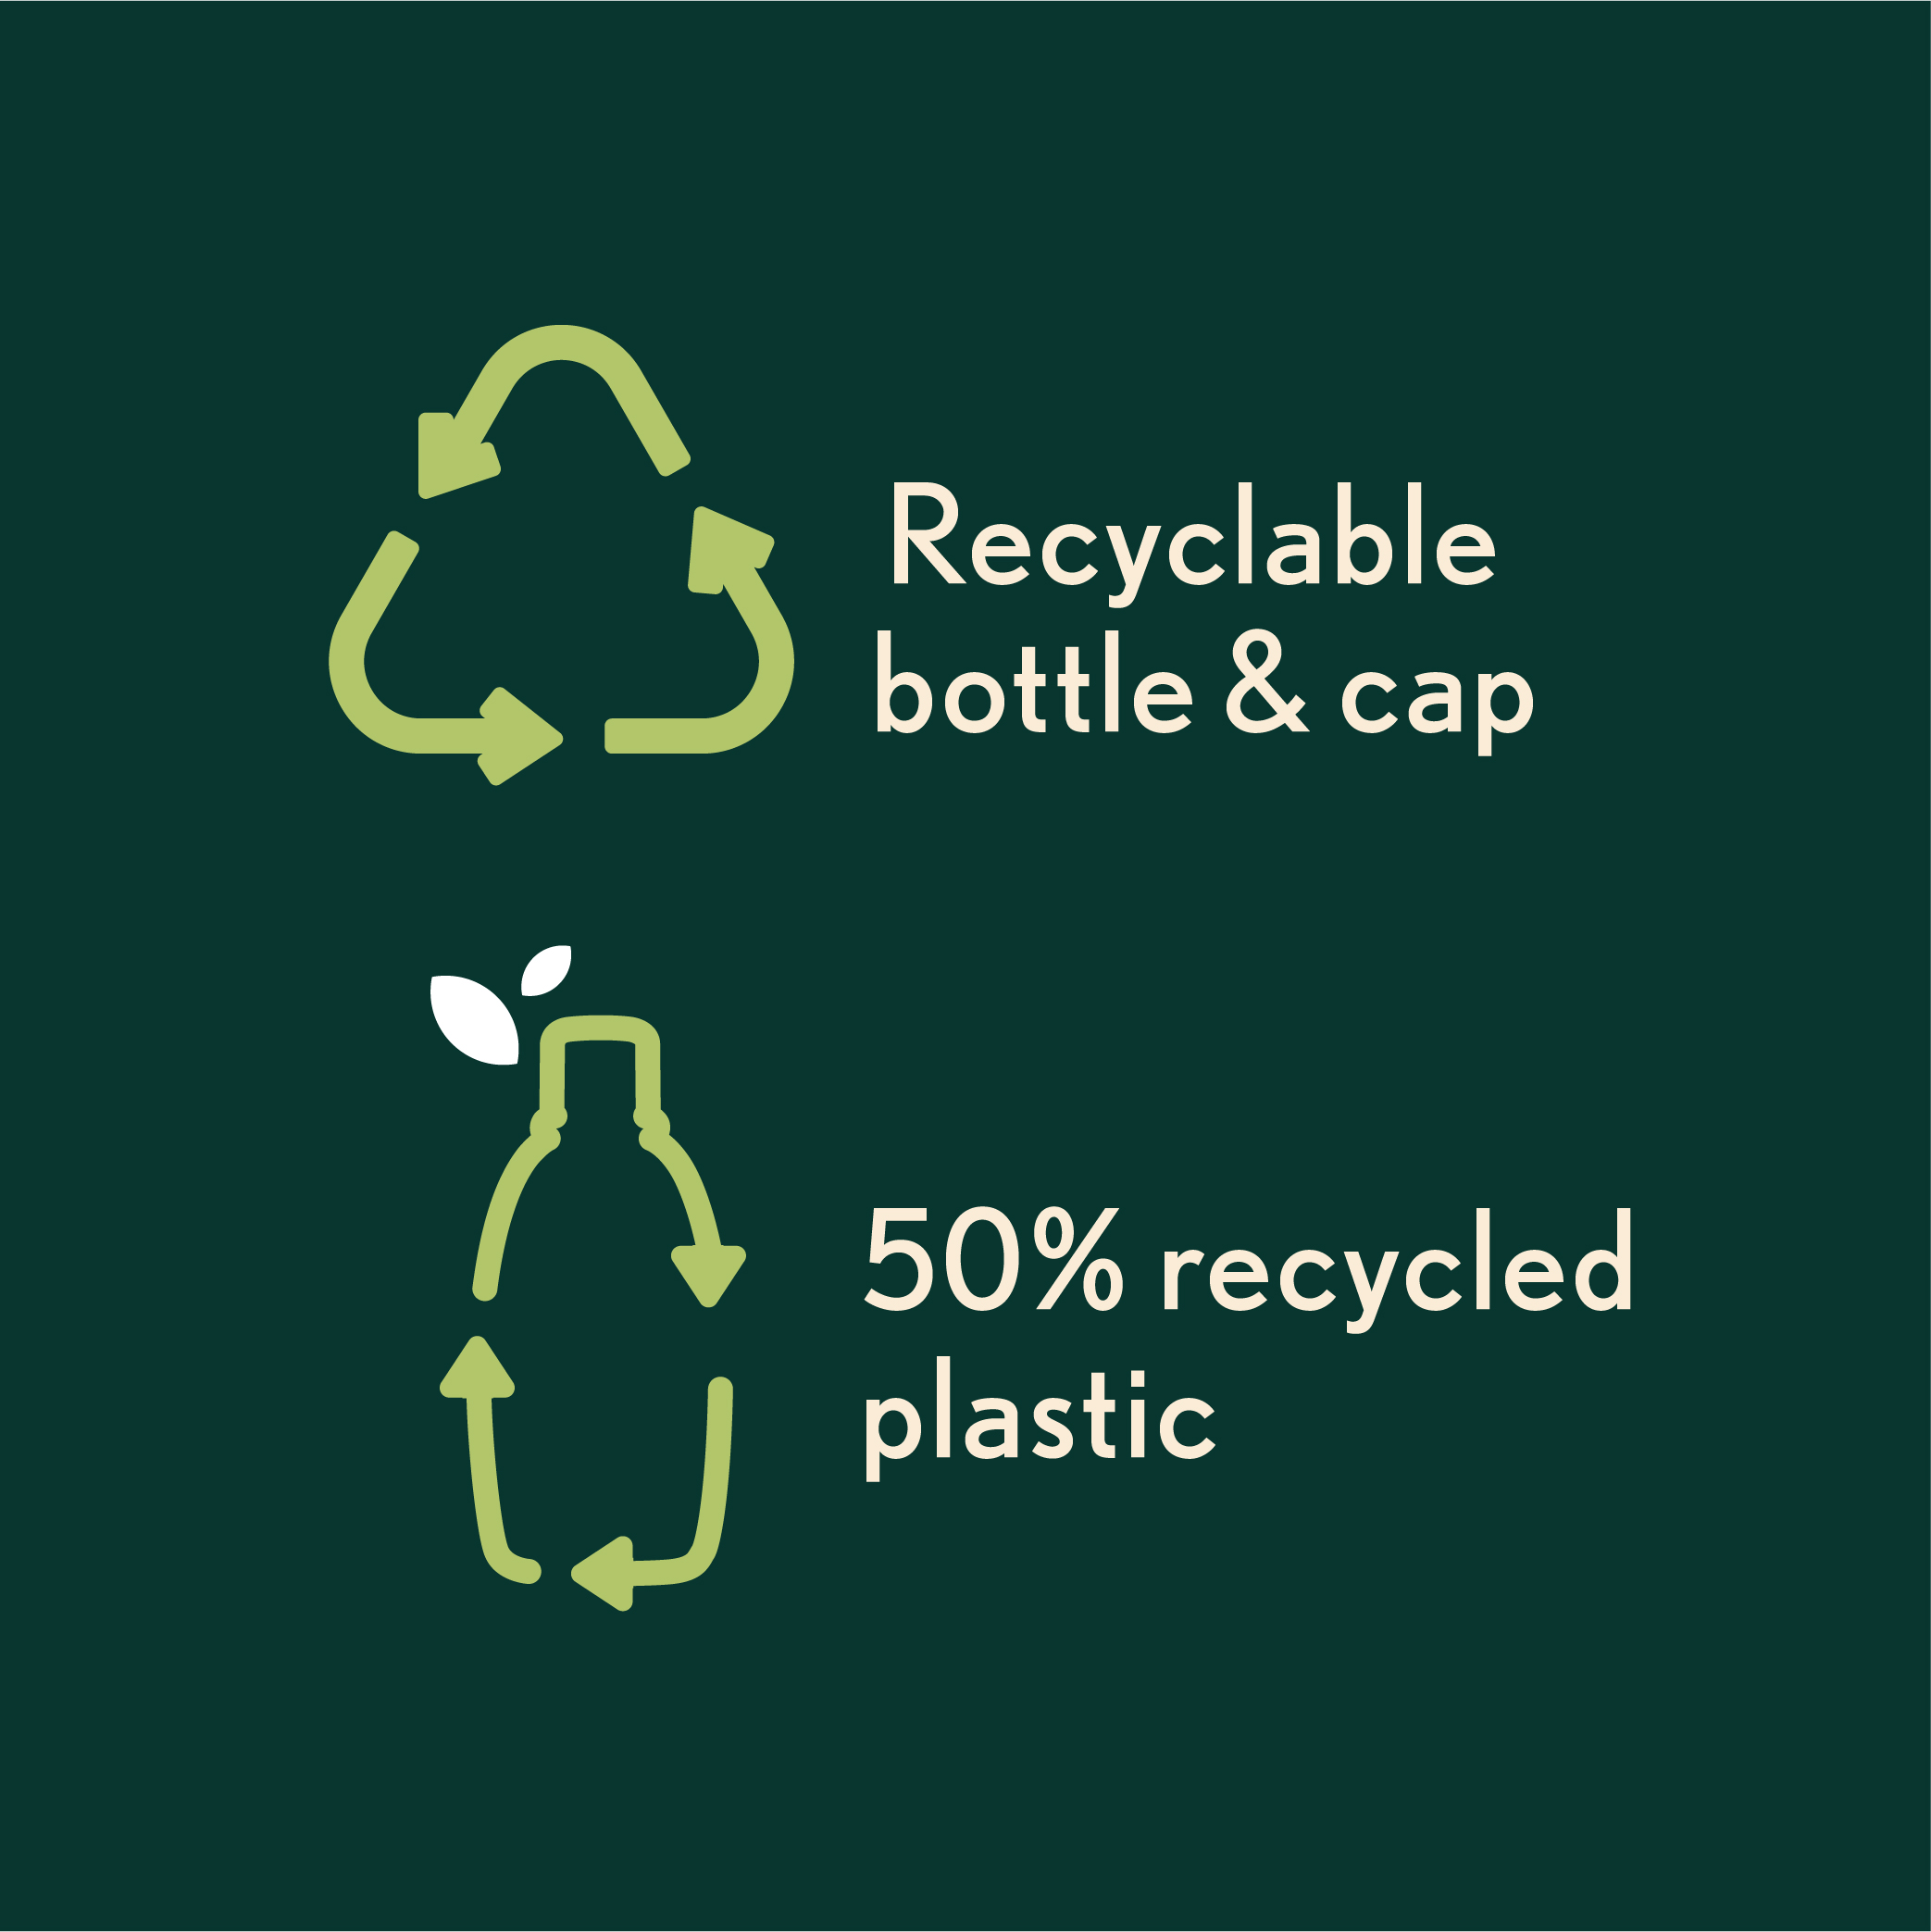 recyclable bottle & cap, 50% recycled plastic